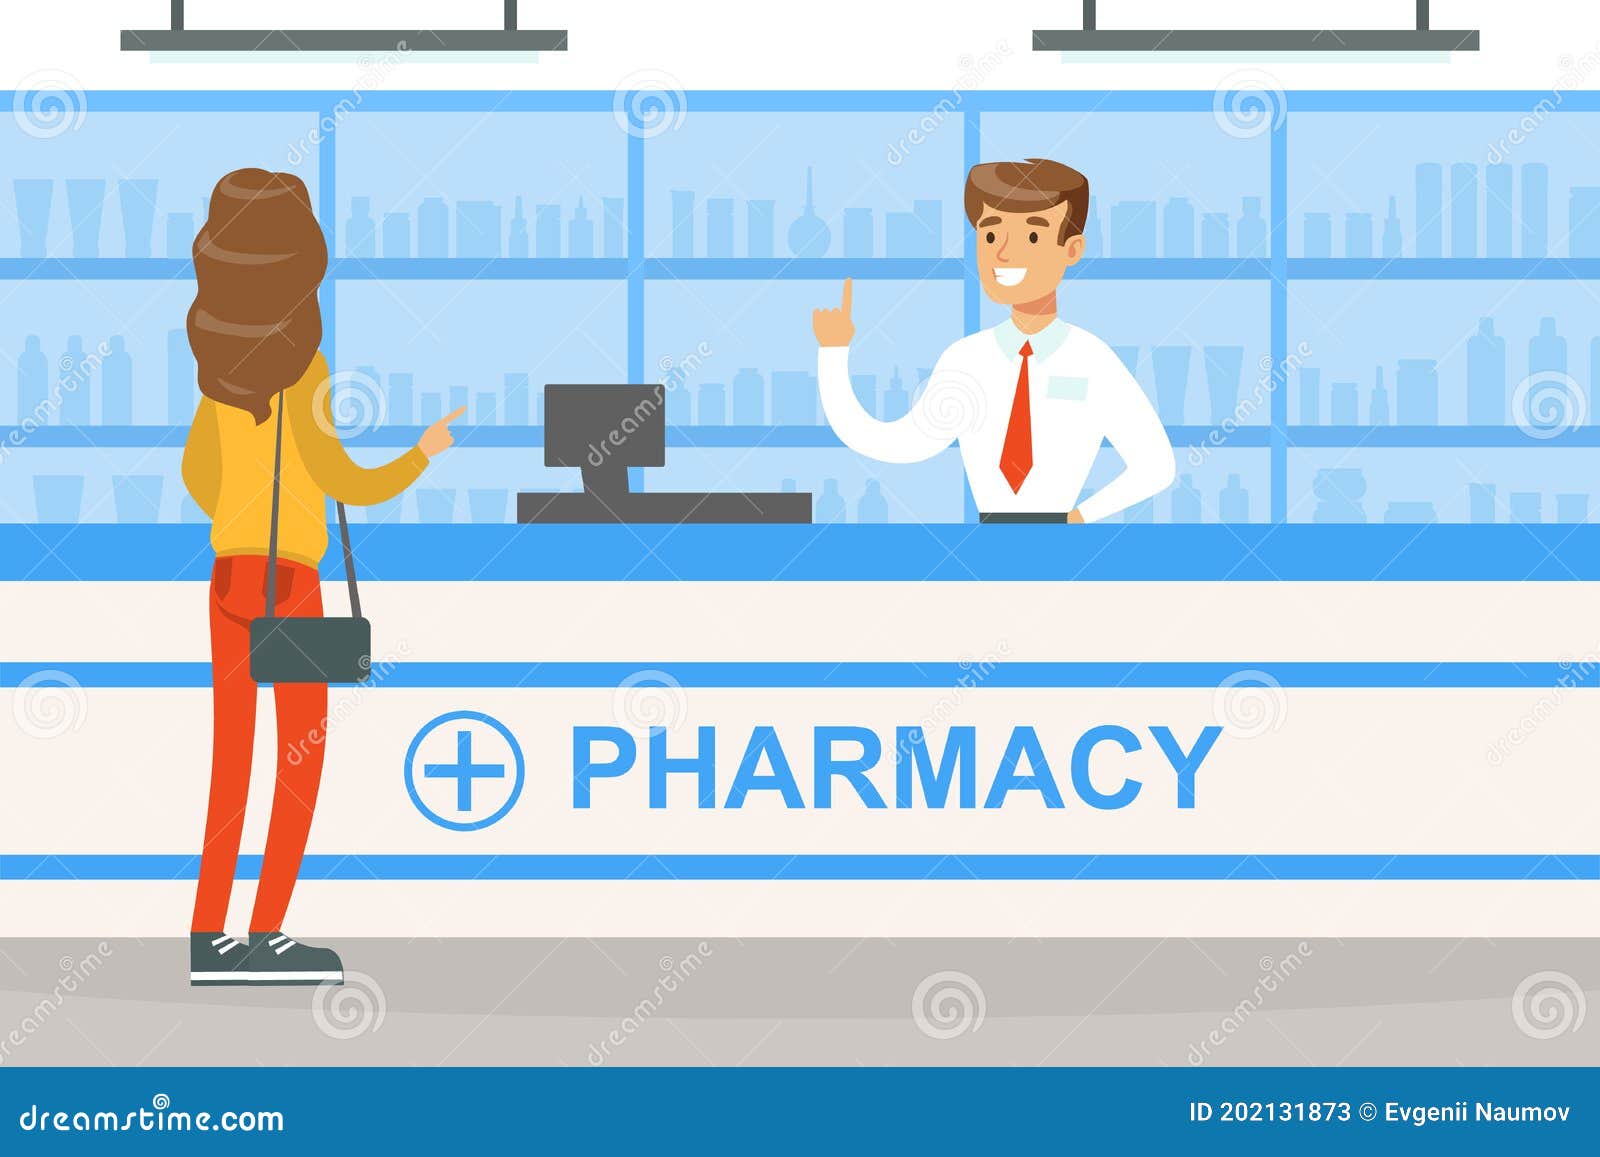 Woman Standing Behind Counter in Pharmacy, Man Pharmacist Selling ...